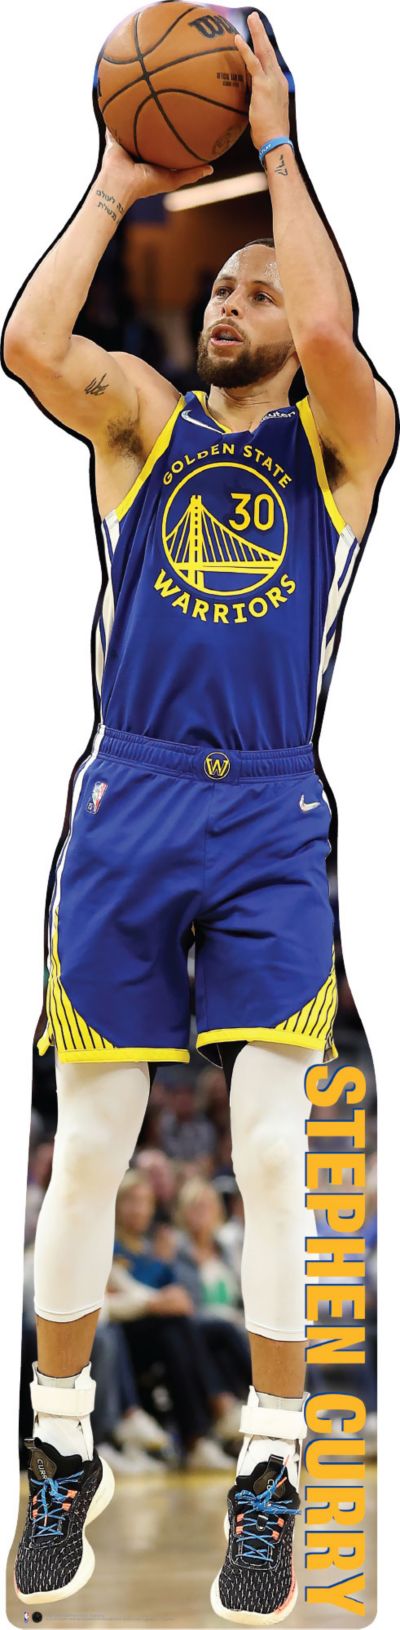 Party City Stephen Curry Life-Size Cardboard Cutout, 6ft 2in - NBA Golden State